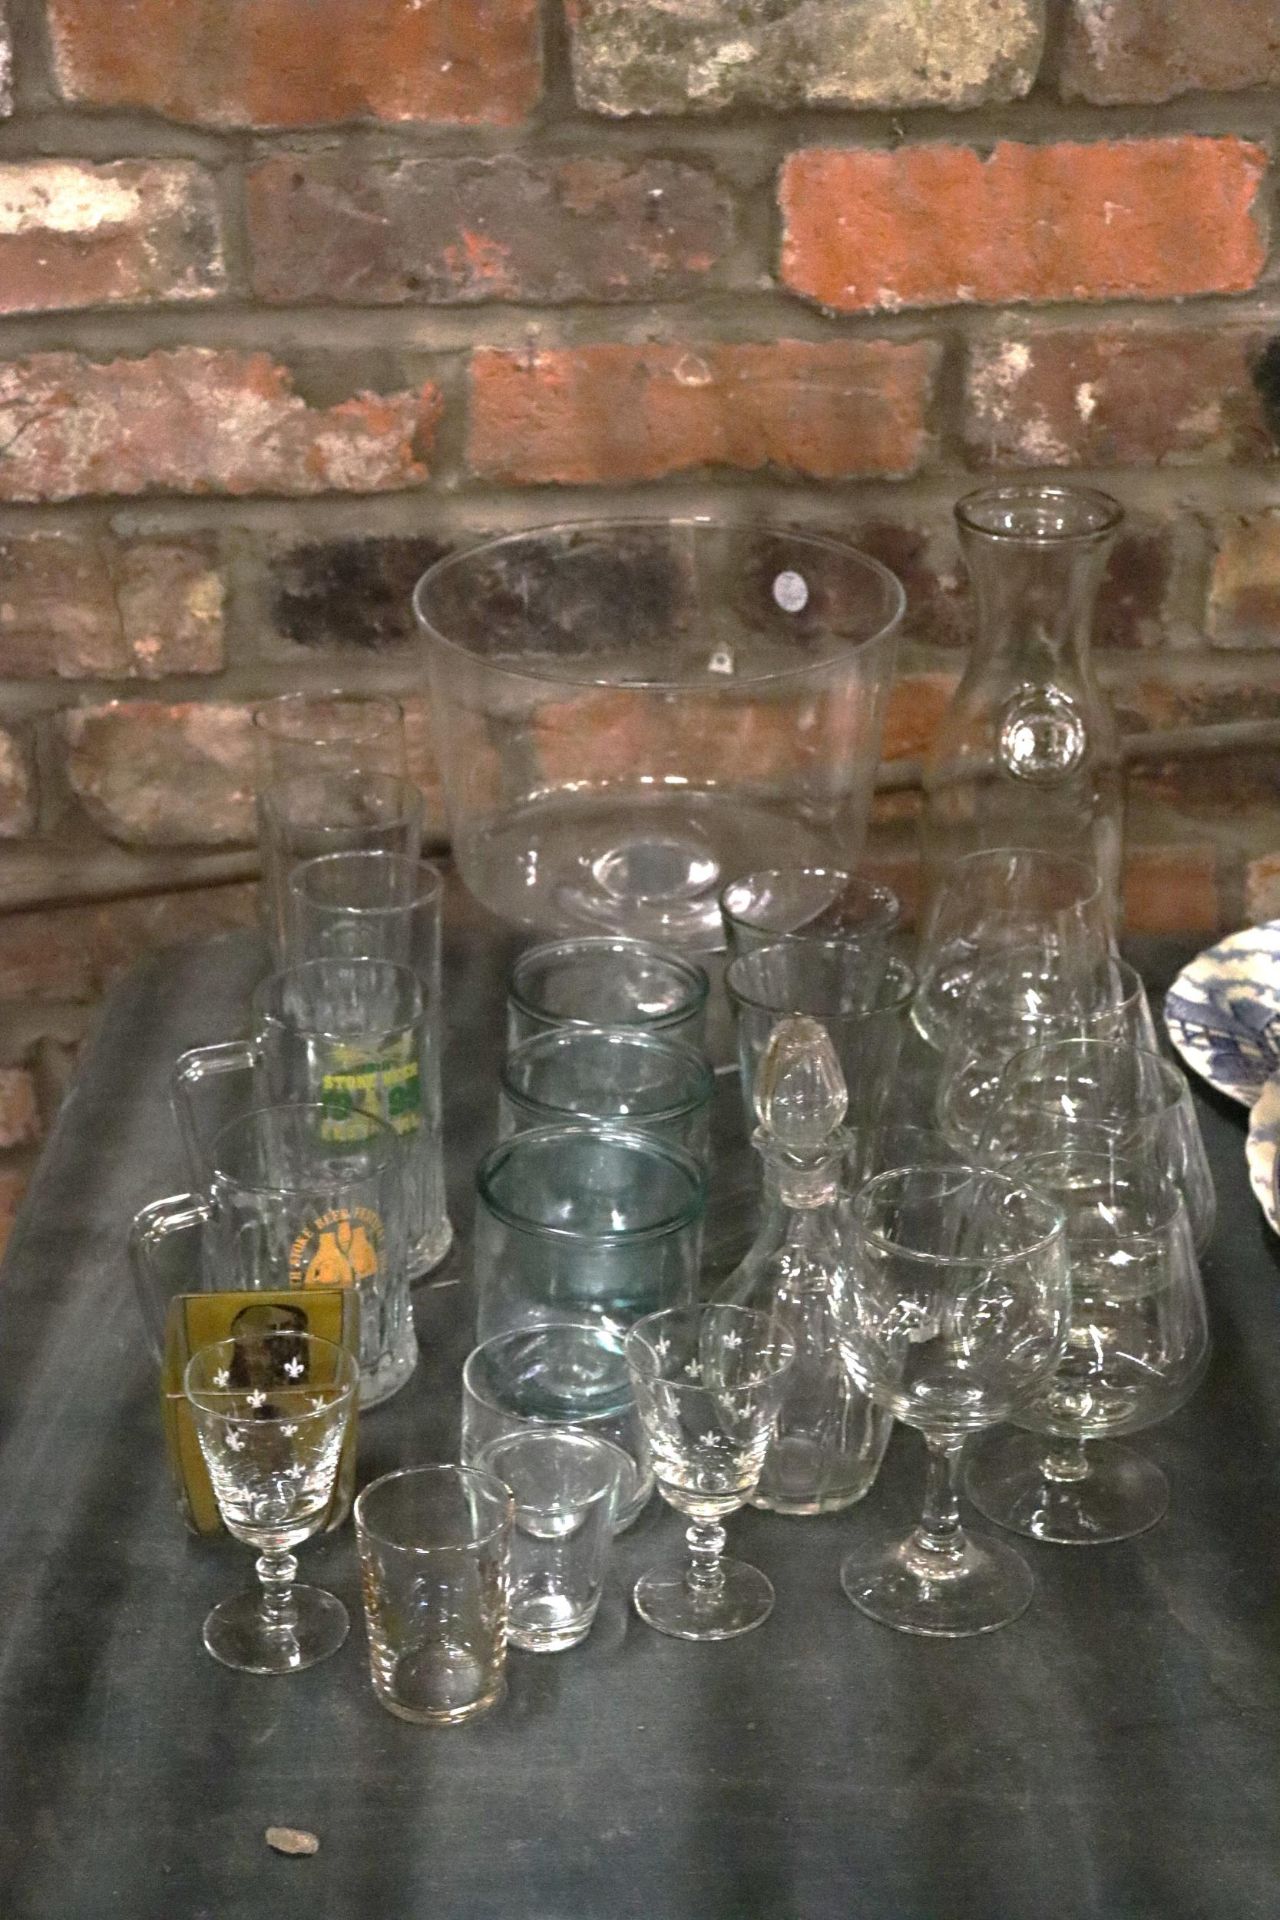 A QUANTITY OF GLASSWARE TO INCLUDE A LARGE FOOTED BOWL, GLASSES, TANKARDS, TUMBLERS, ETC